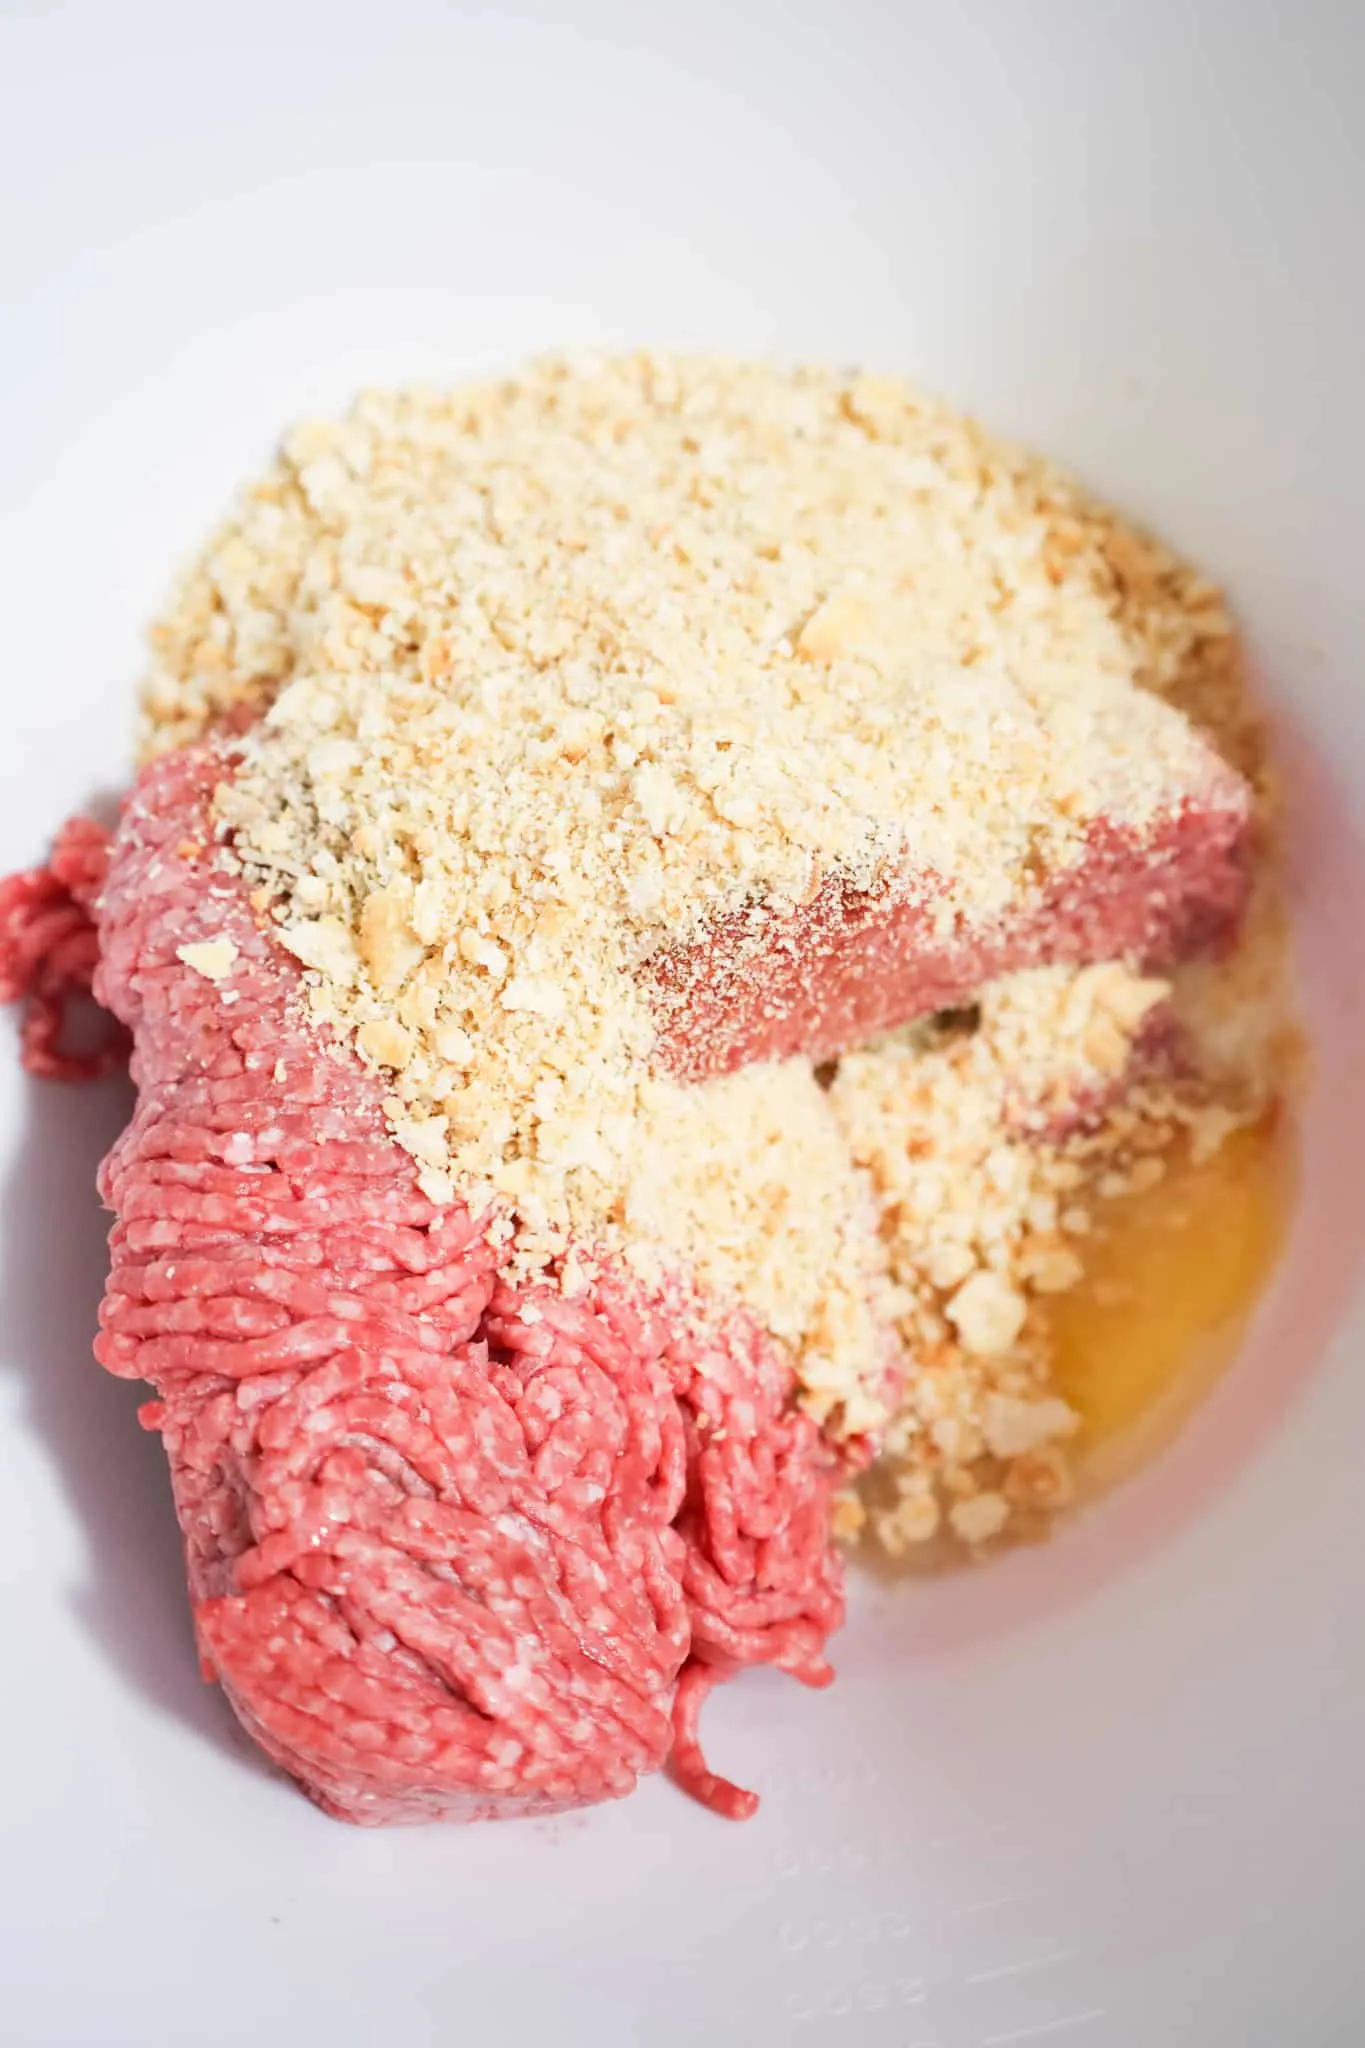 ritz cracker crumbs on top of ground beef in a mixing bowl